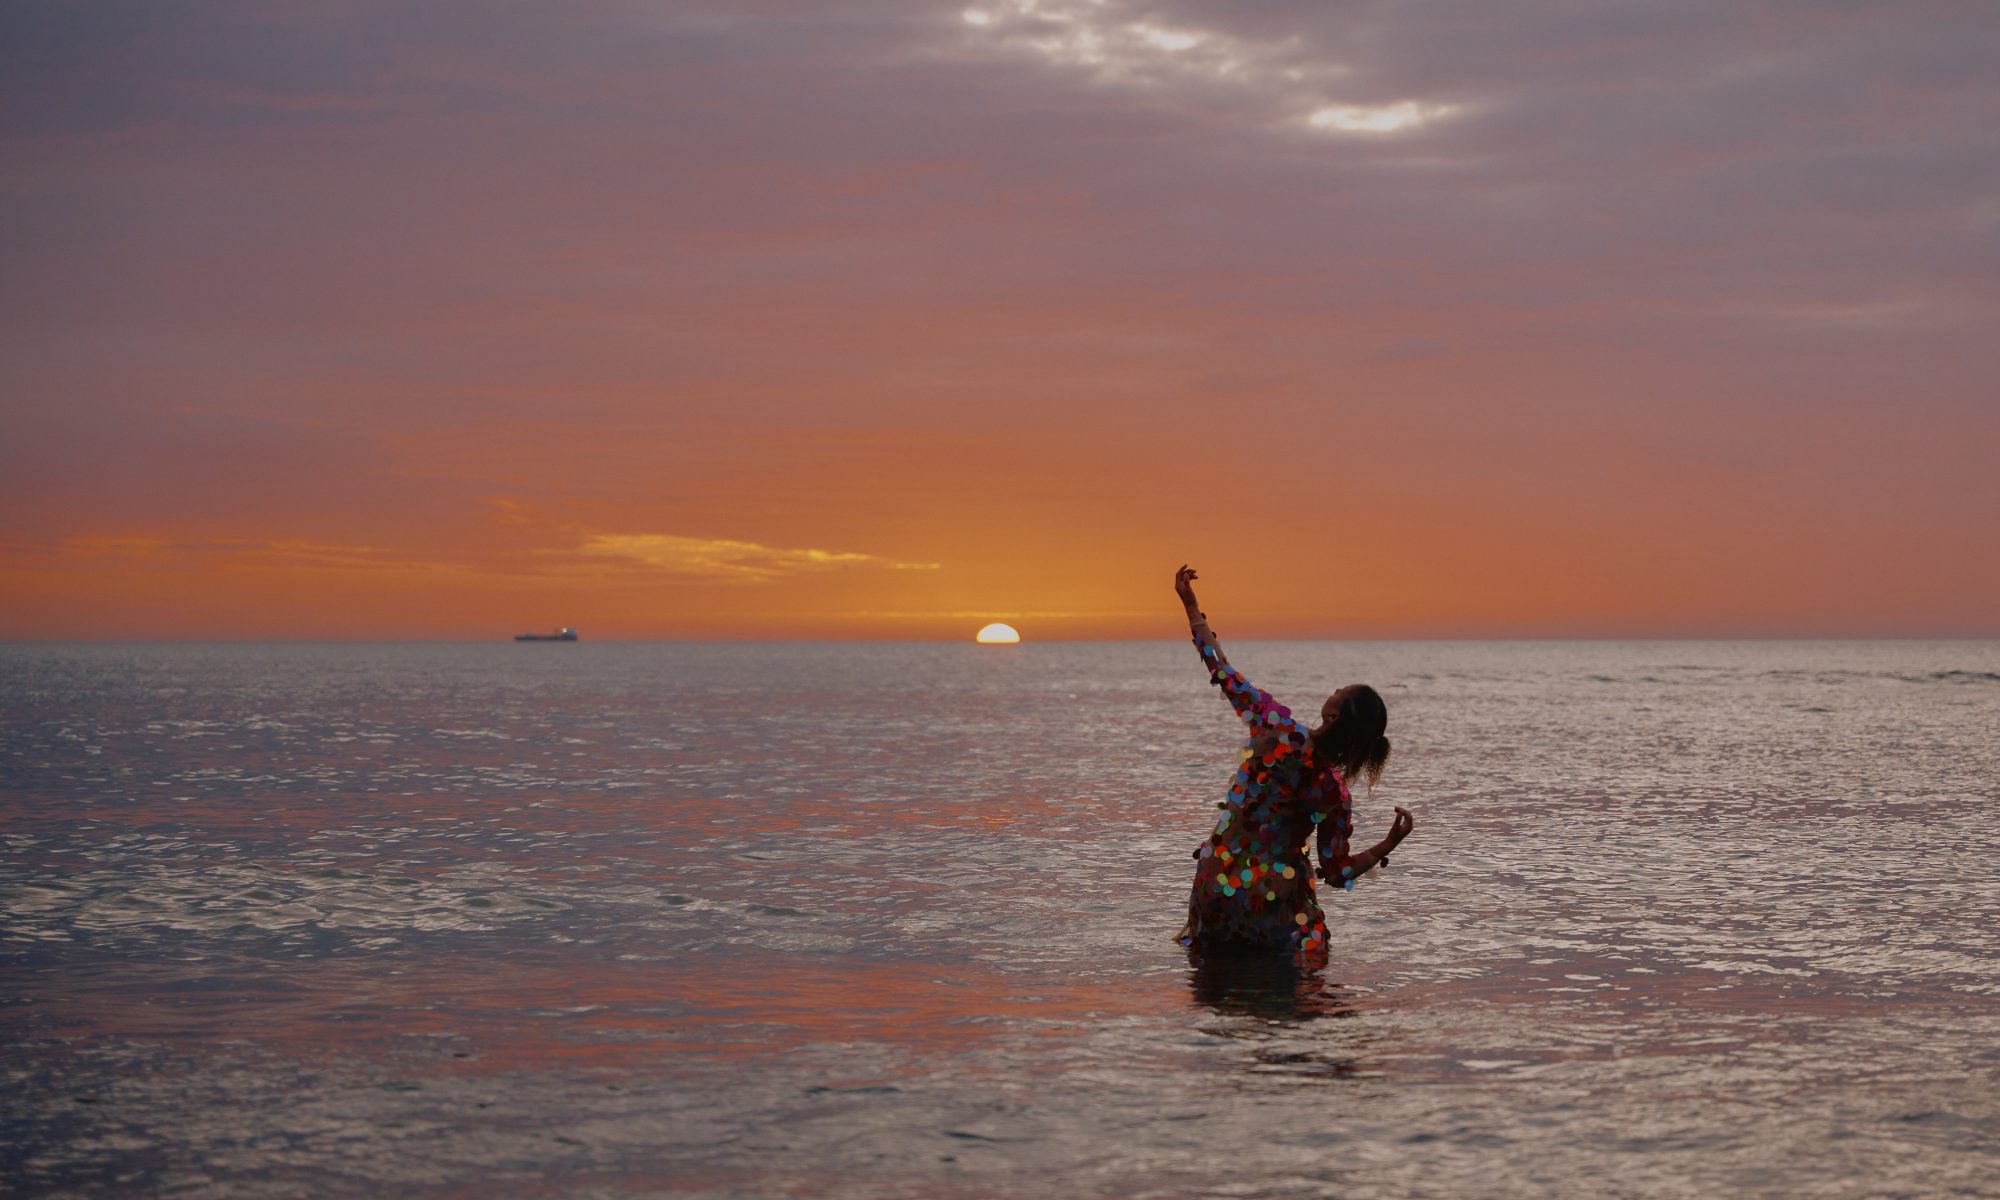 Michaela Wate standing in the ocean at sunset with her left arm raised towards the sky and right arm bent on her side.